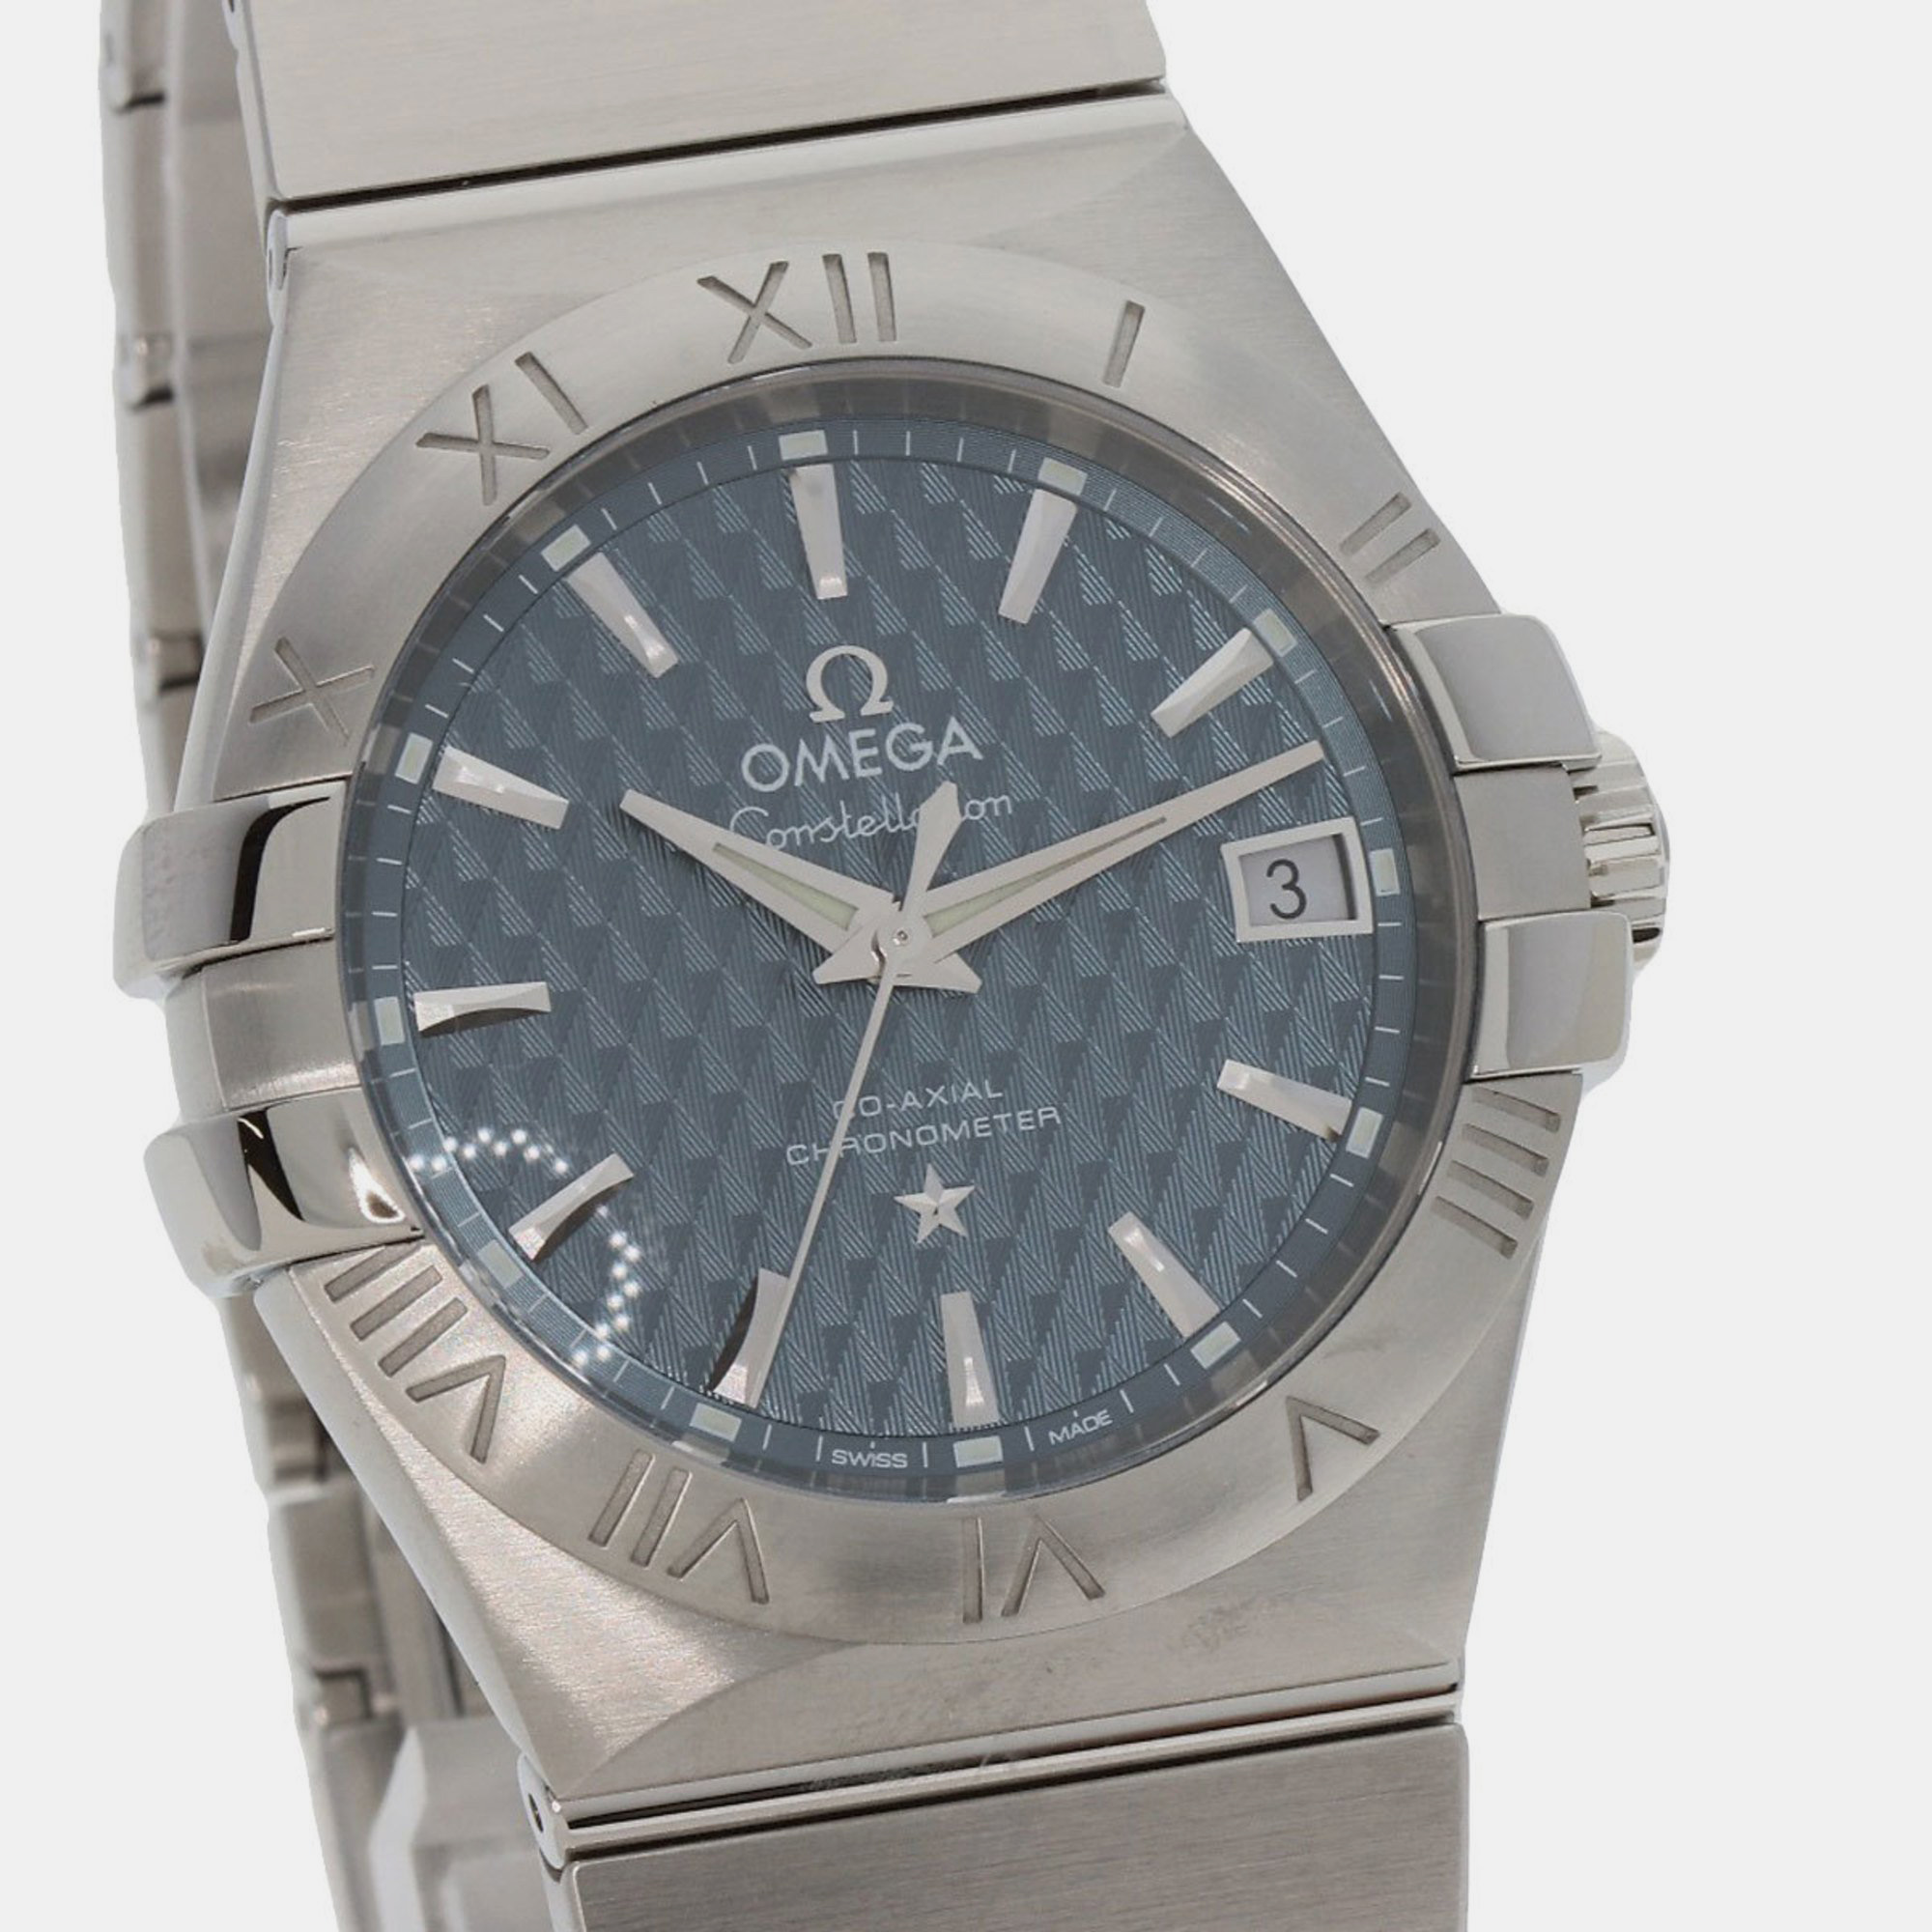 Omega Blue Stainless Steel Constellation 123.10.35.20.03.002 Automatic Men's Wristwatch 35 Mm